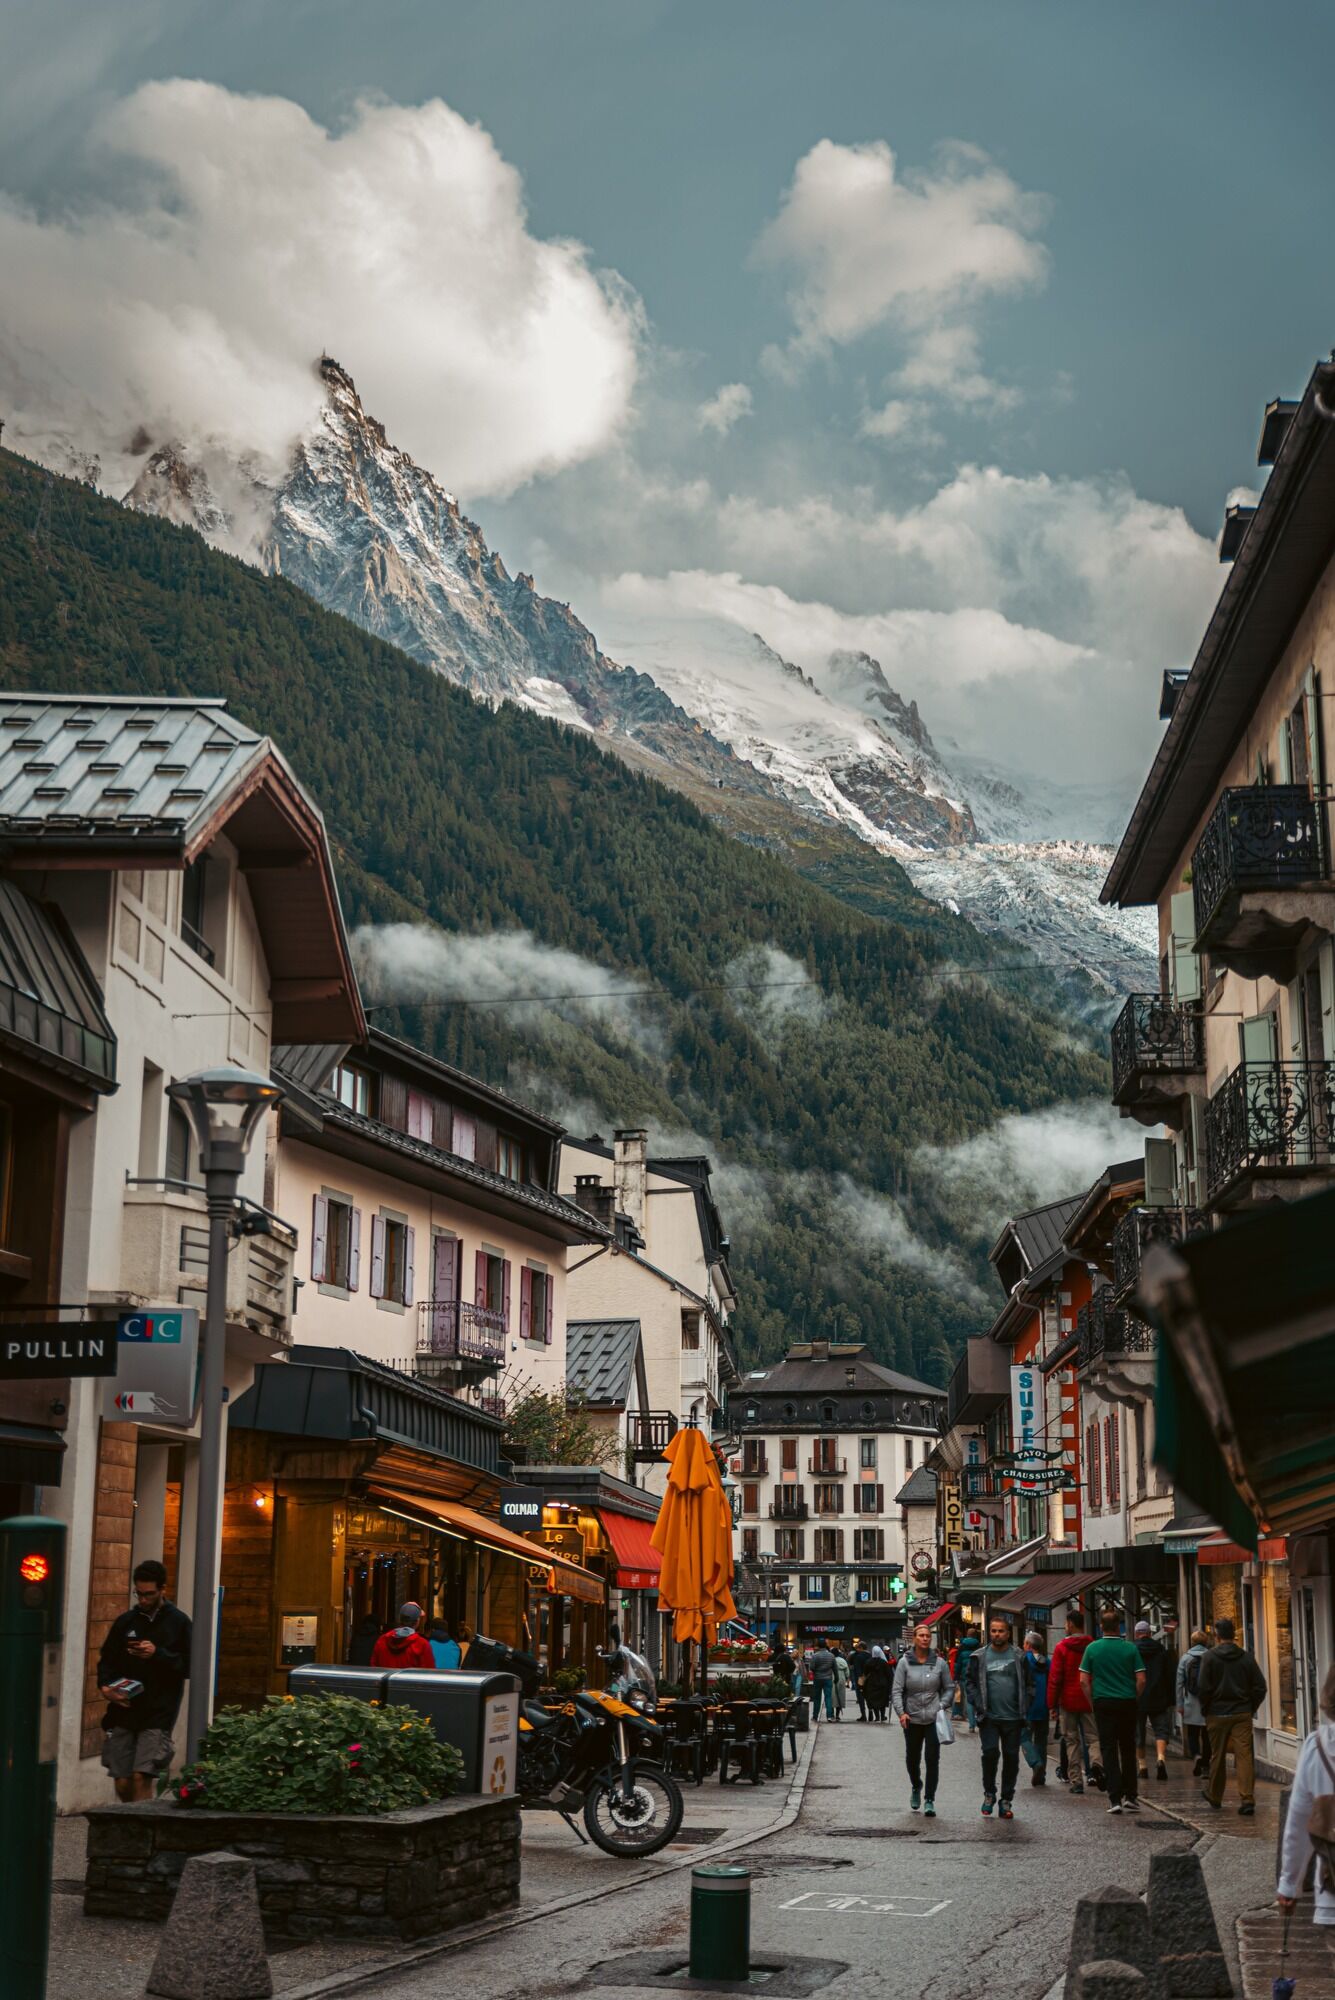 How Chamonix became the world's most famous ski resort